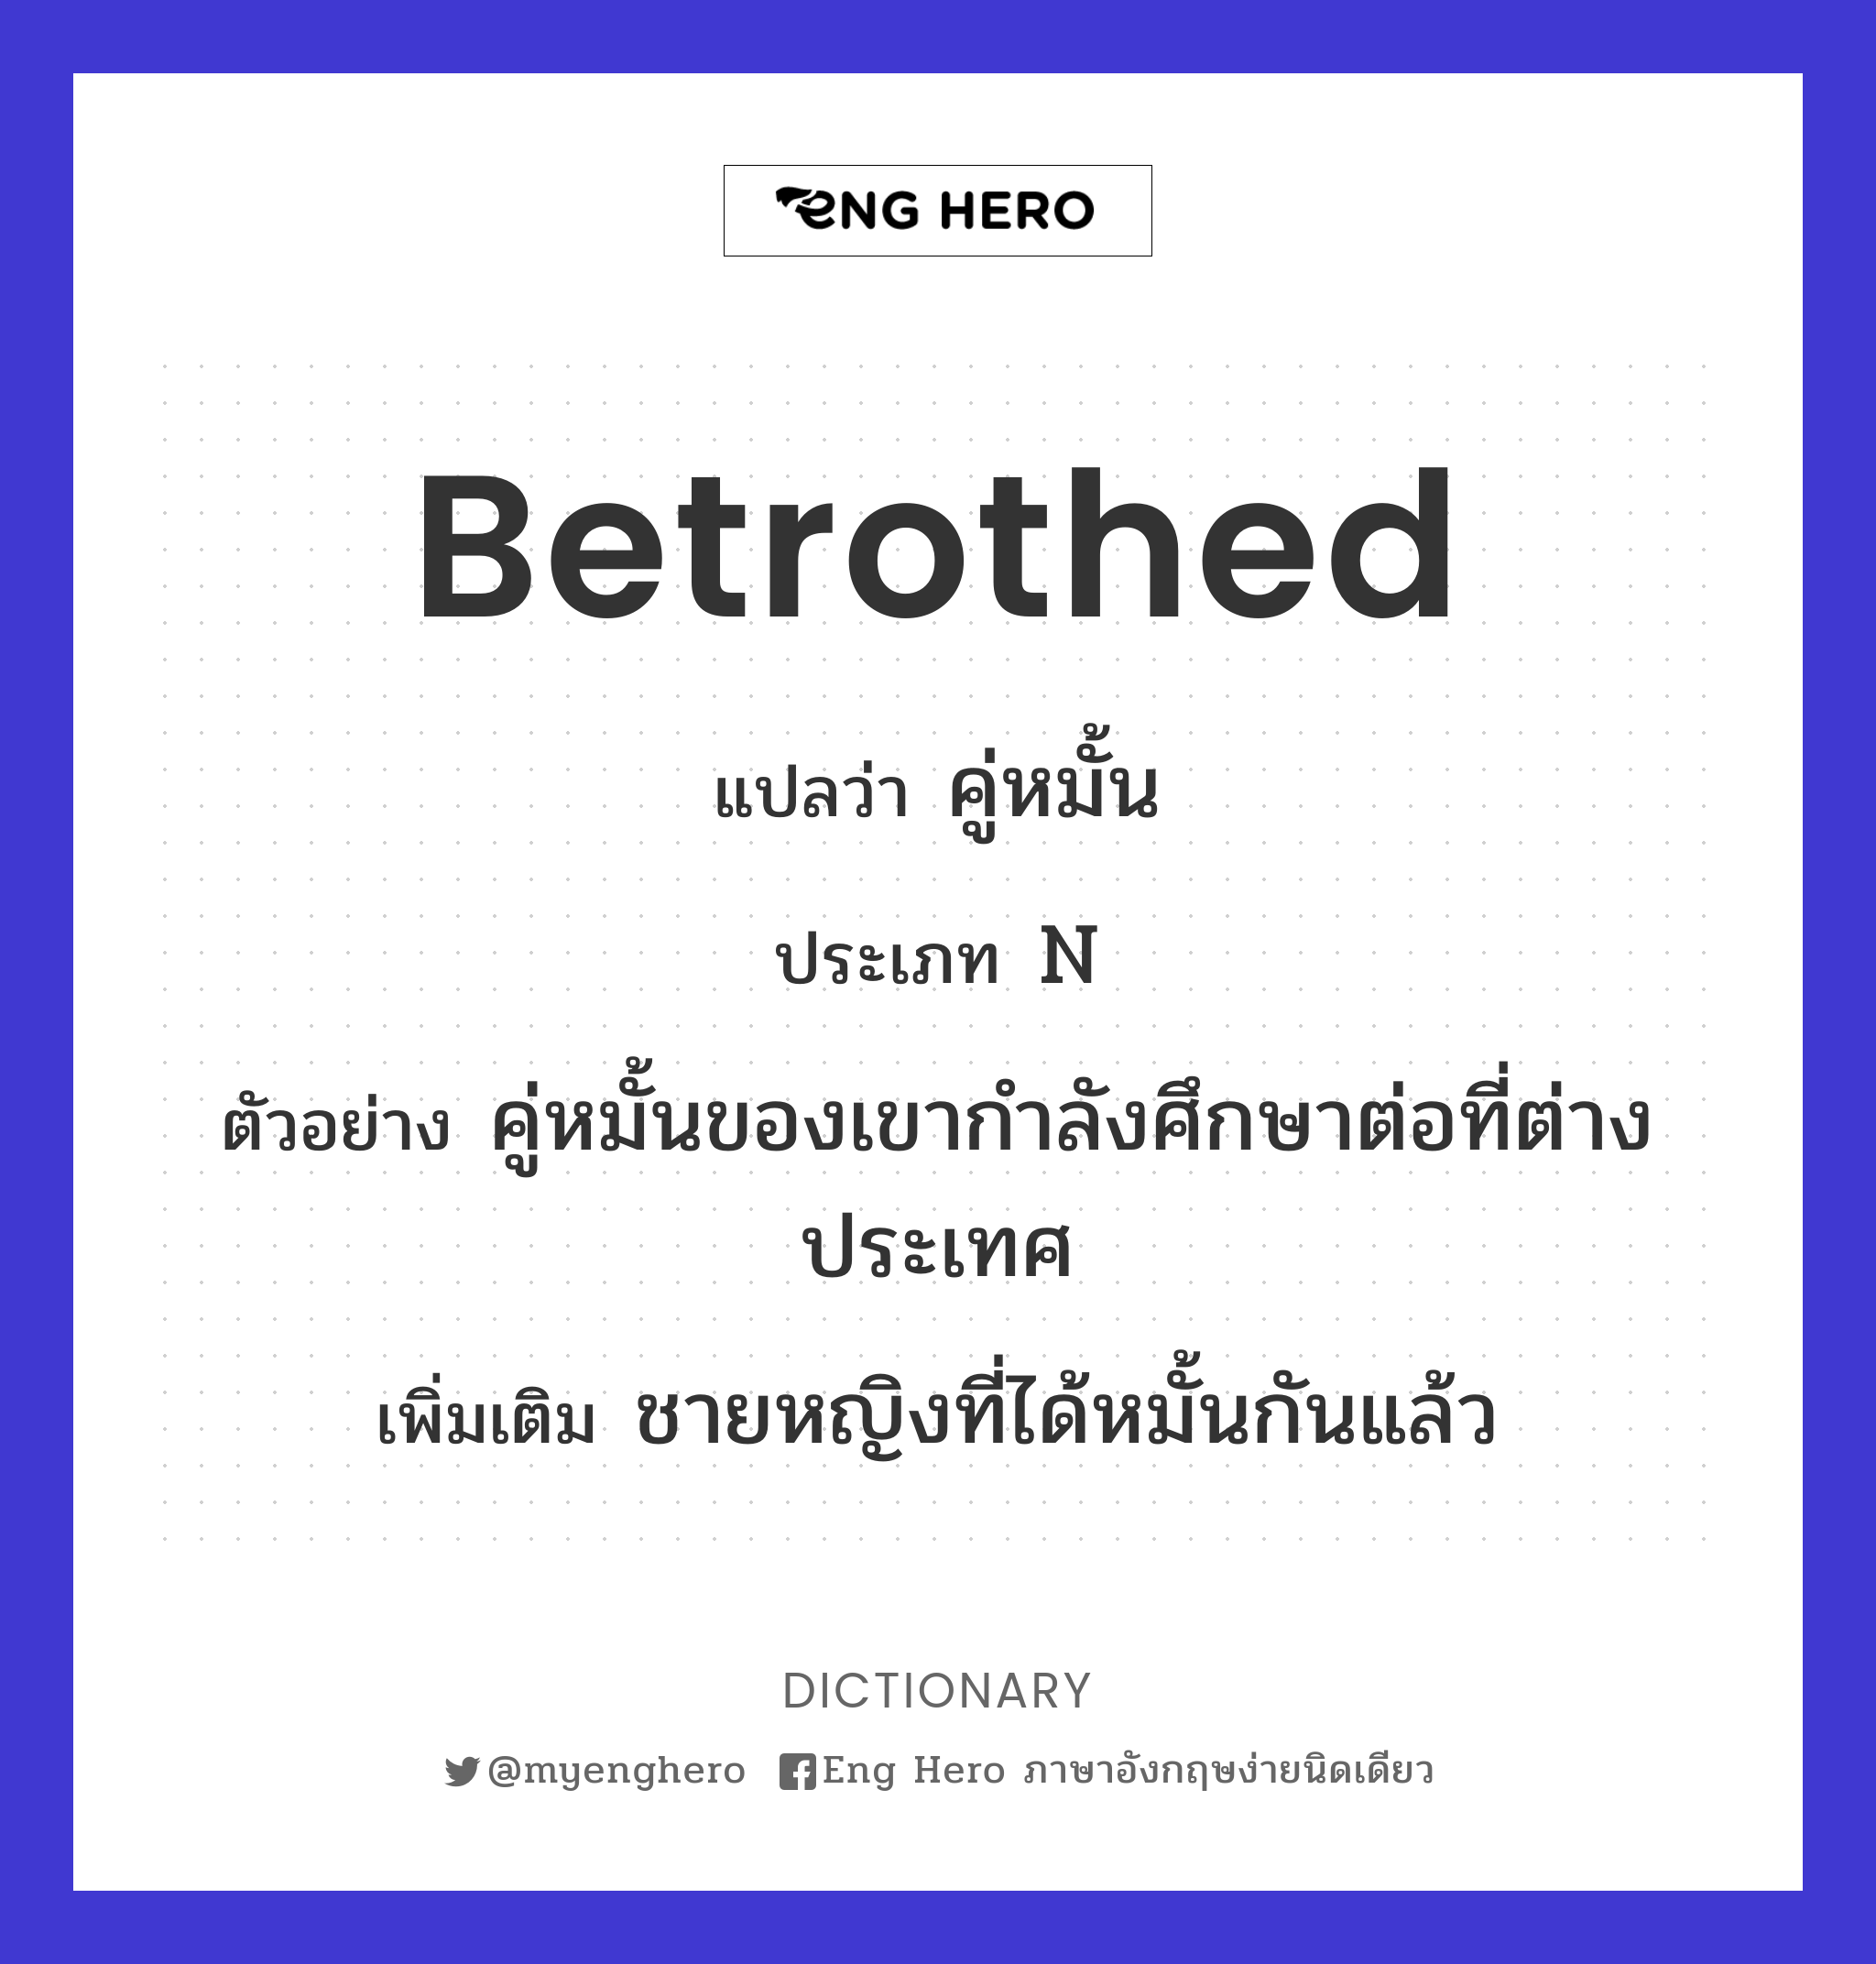 betrothed